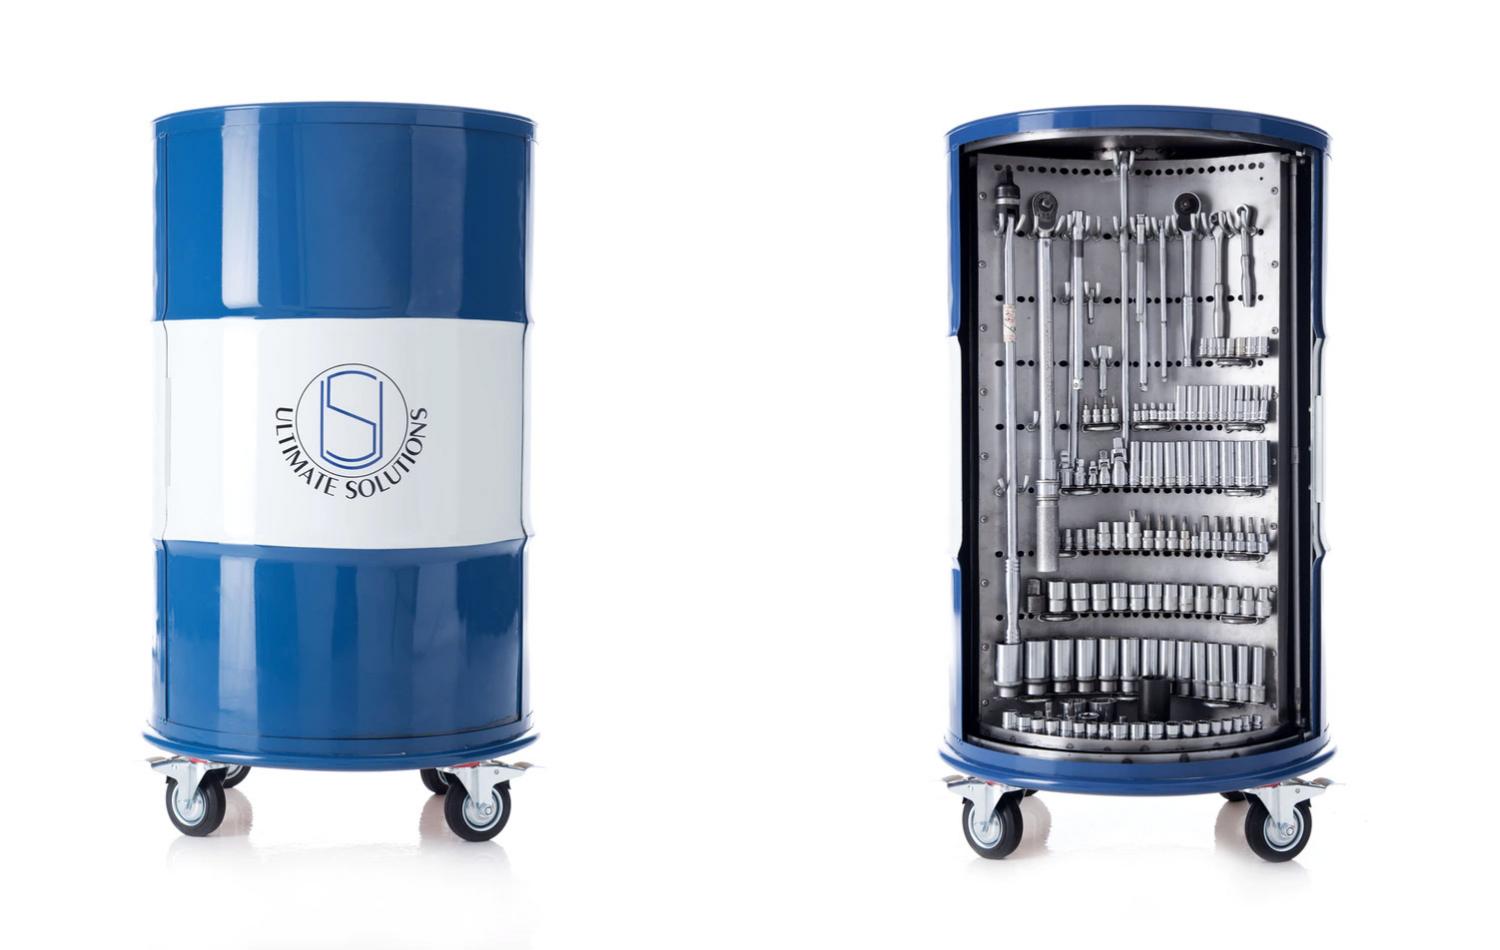 The Ultimate Toolbox - Drum Barrel Toolbox with rotating pegwalls holds tools and socket sets